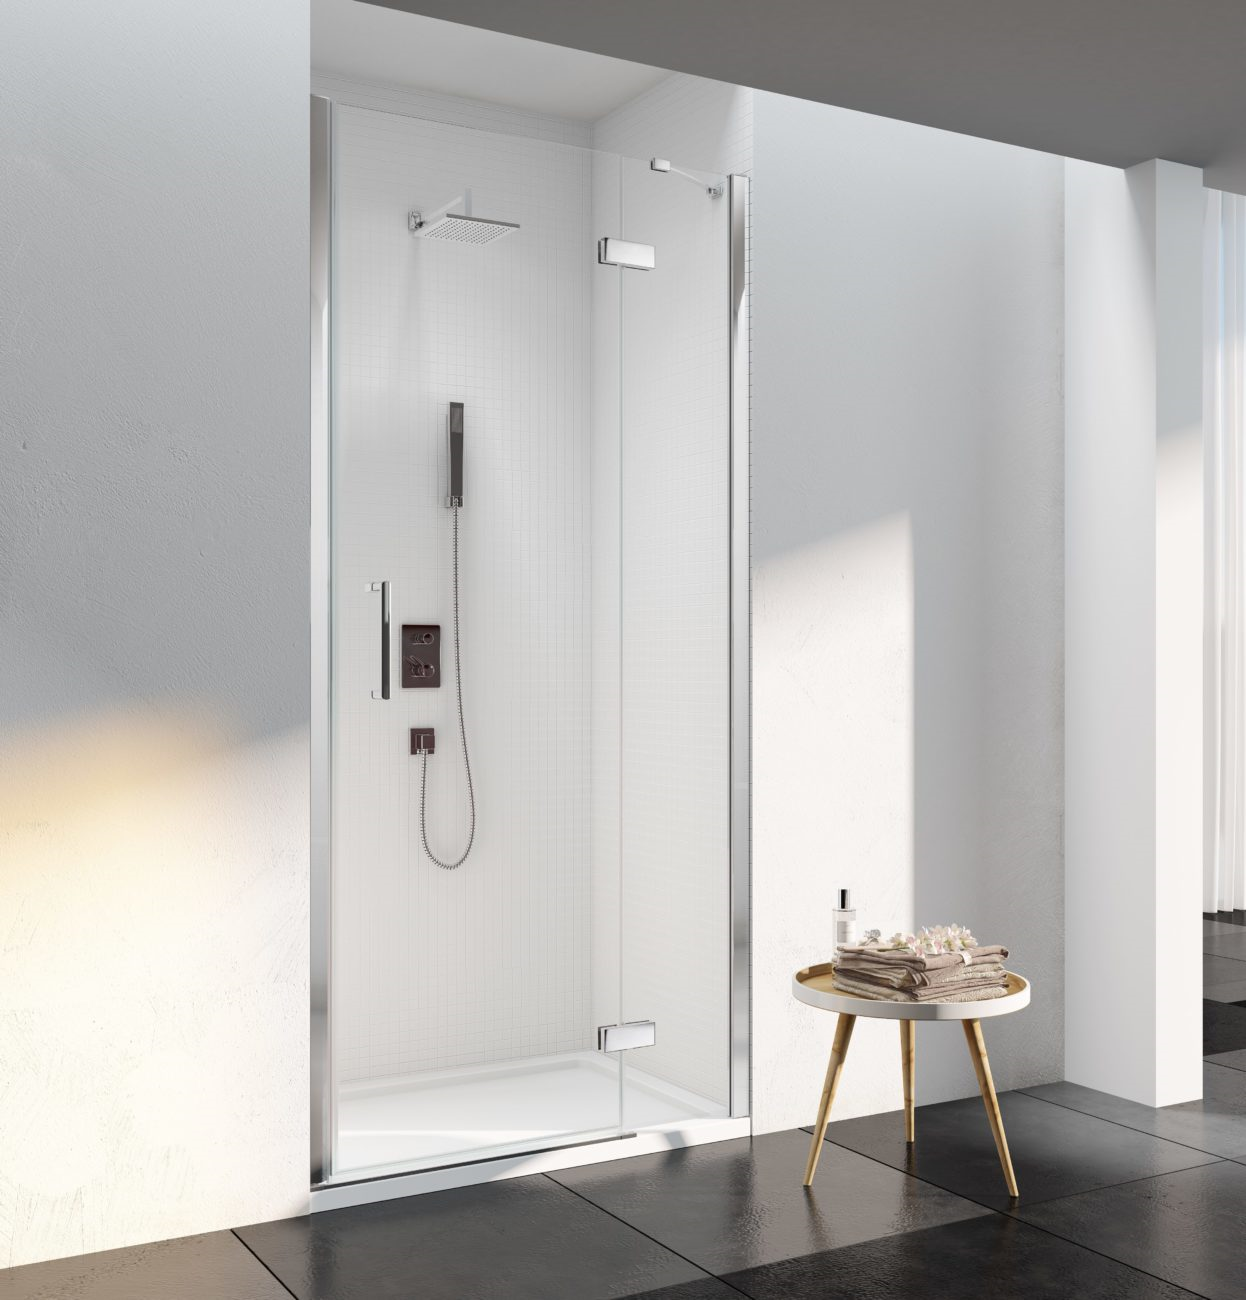 MERLYN S6F800REC Series 6 Framless Hinged Shower Door 800mm with In-Line Panel for Recess Fitting